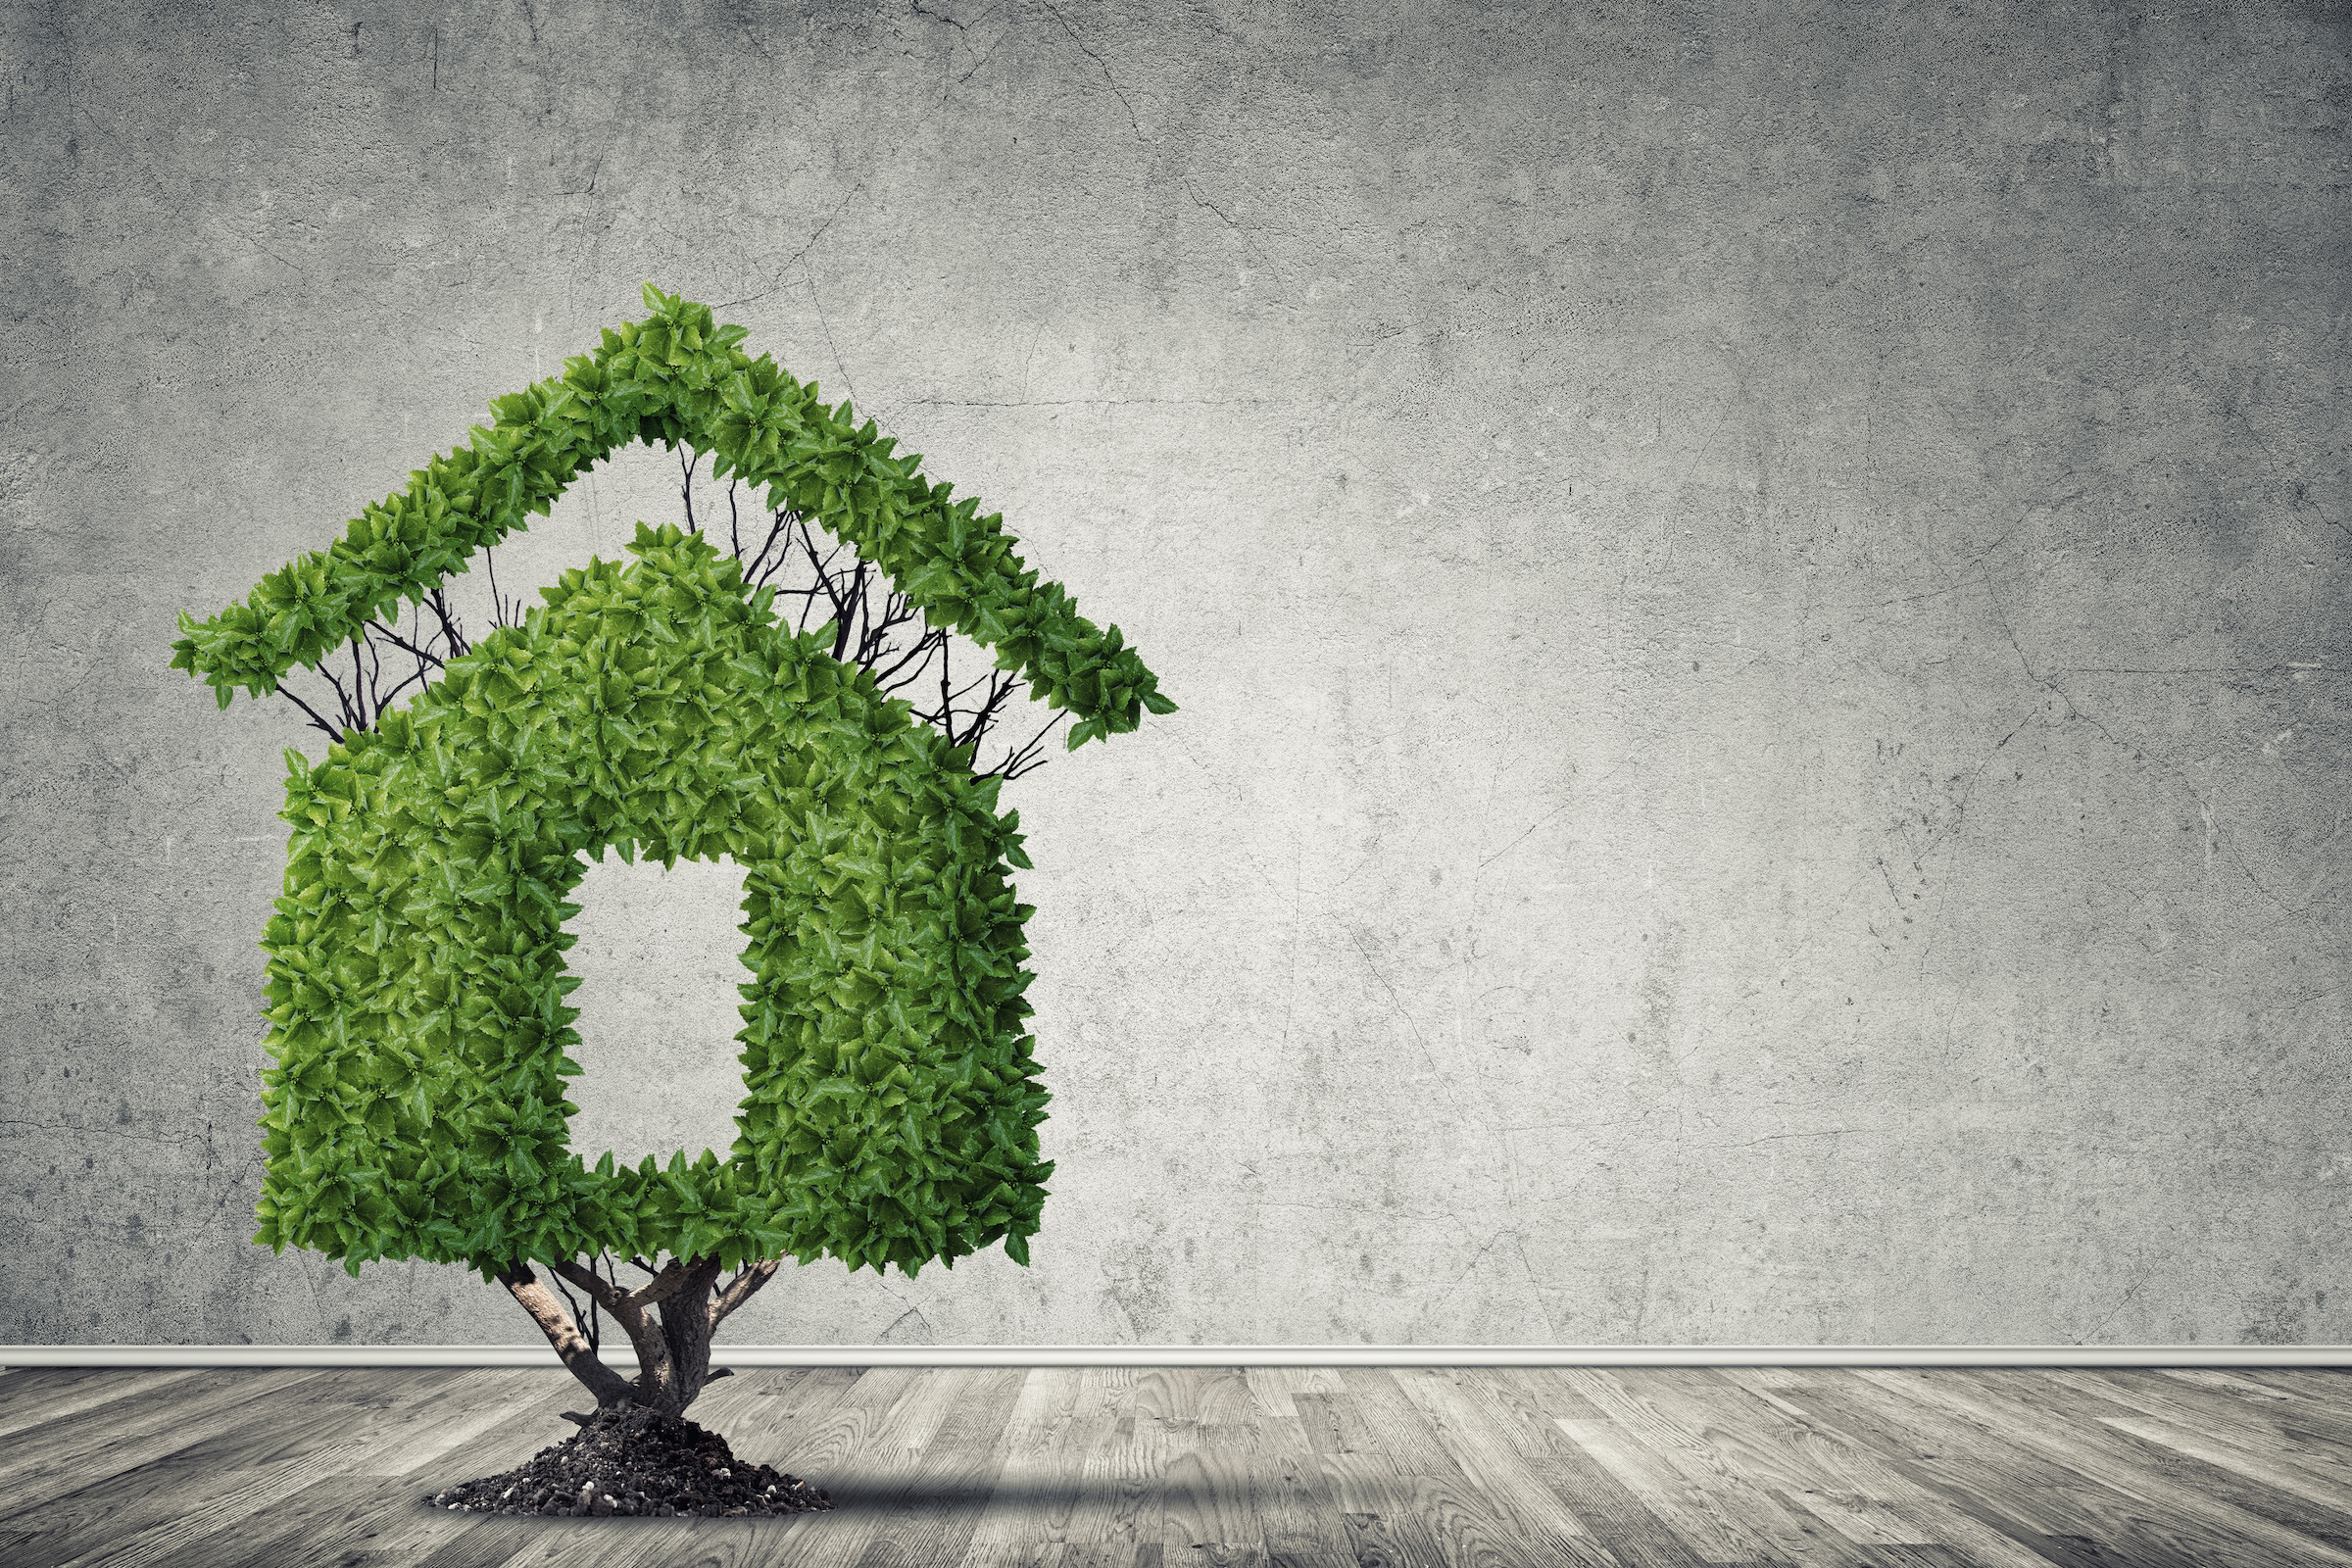 Sustainable Investing: Green Initiatives for Houston Property Owners